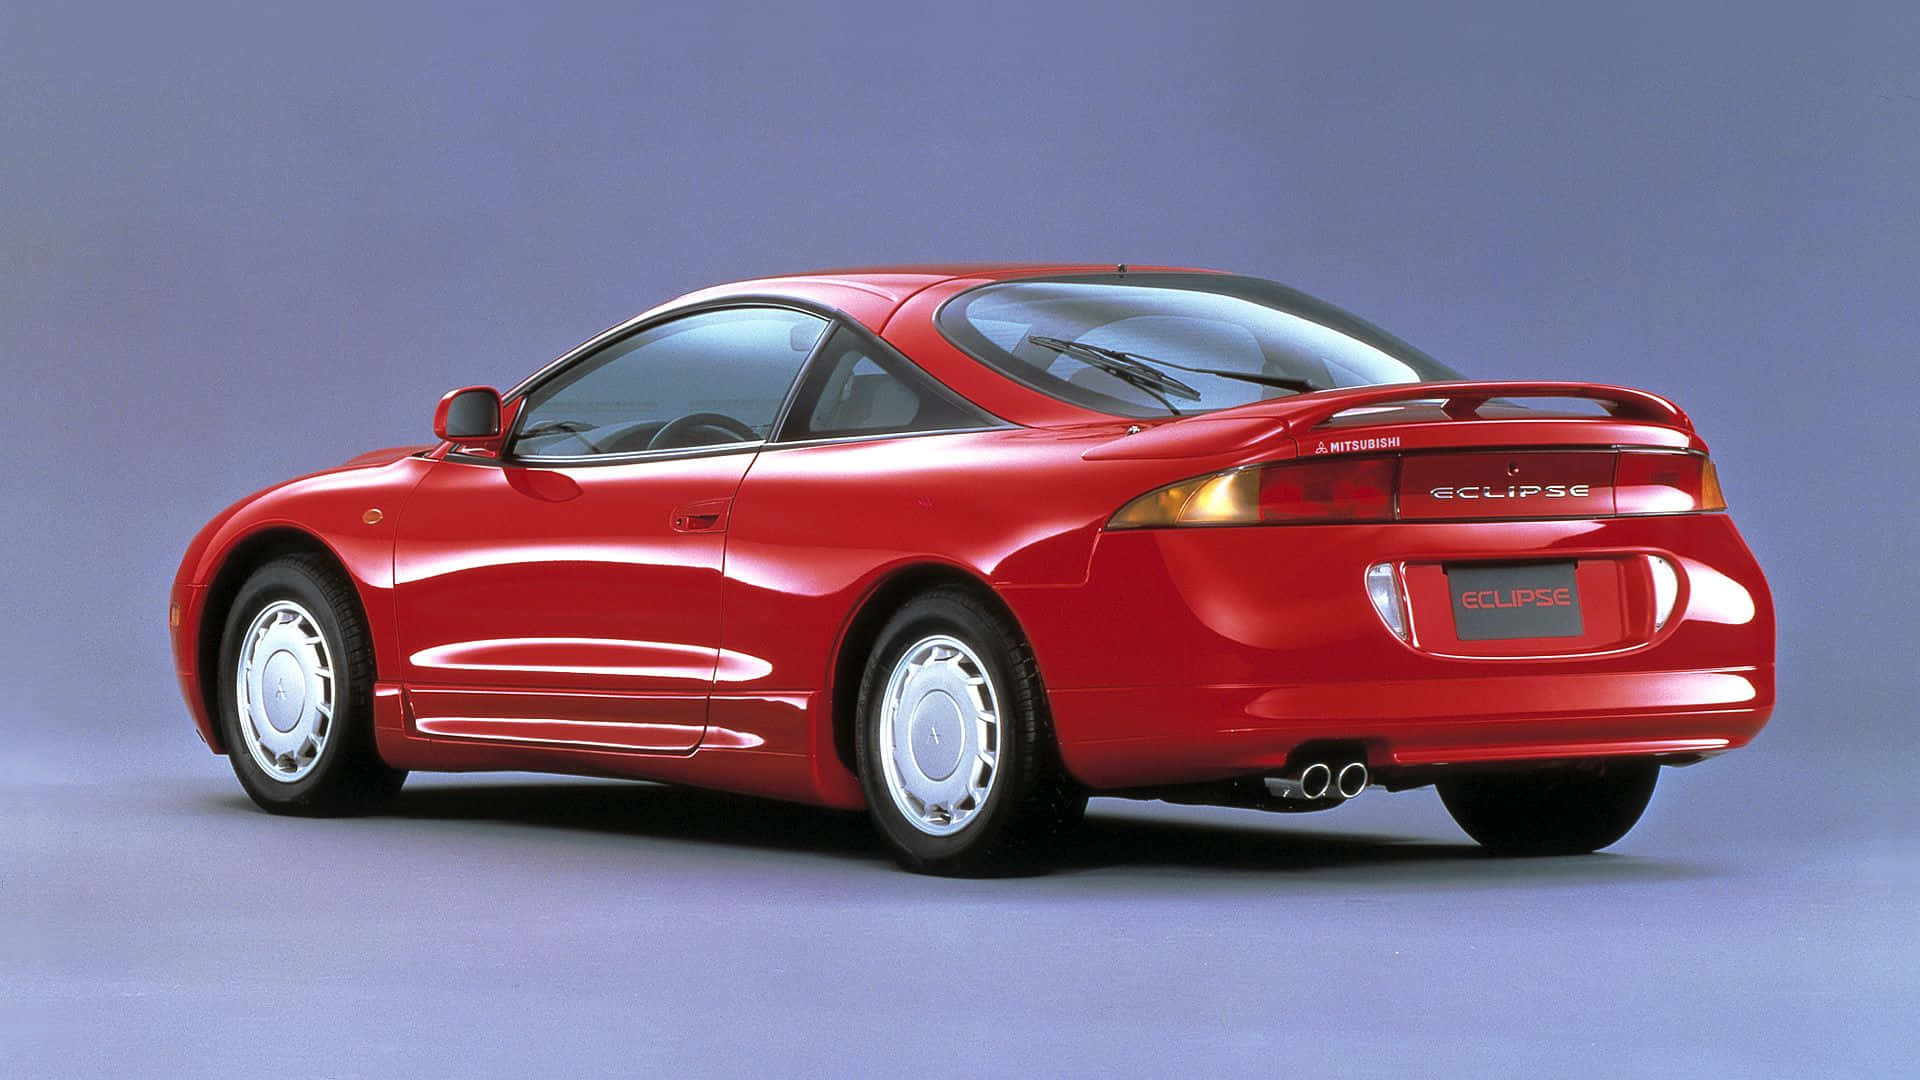 Stunning Mitsubishi Eclipse In Open Road Wallpaper